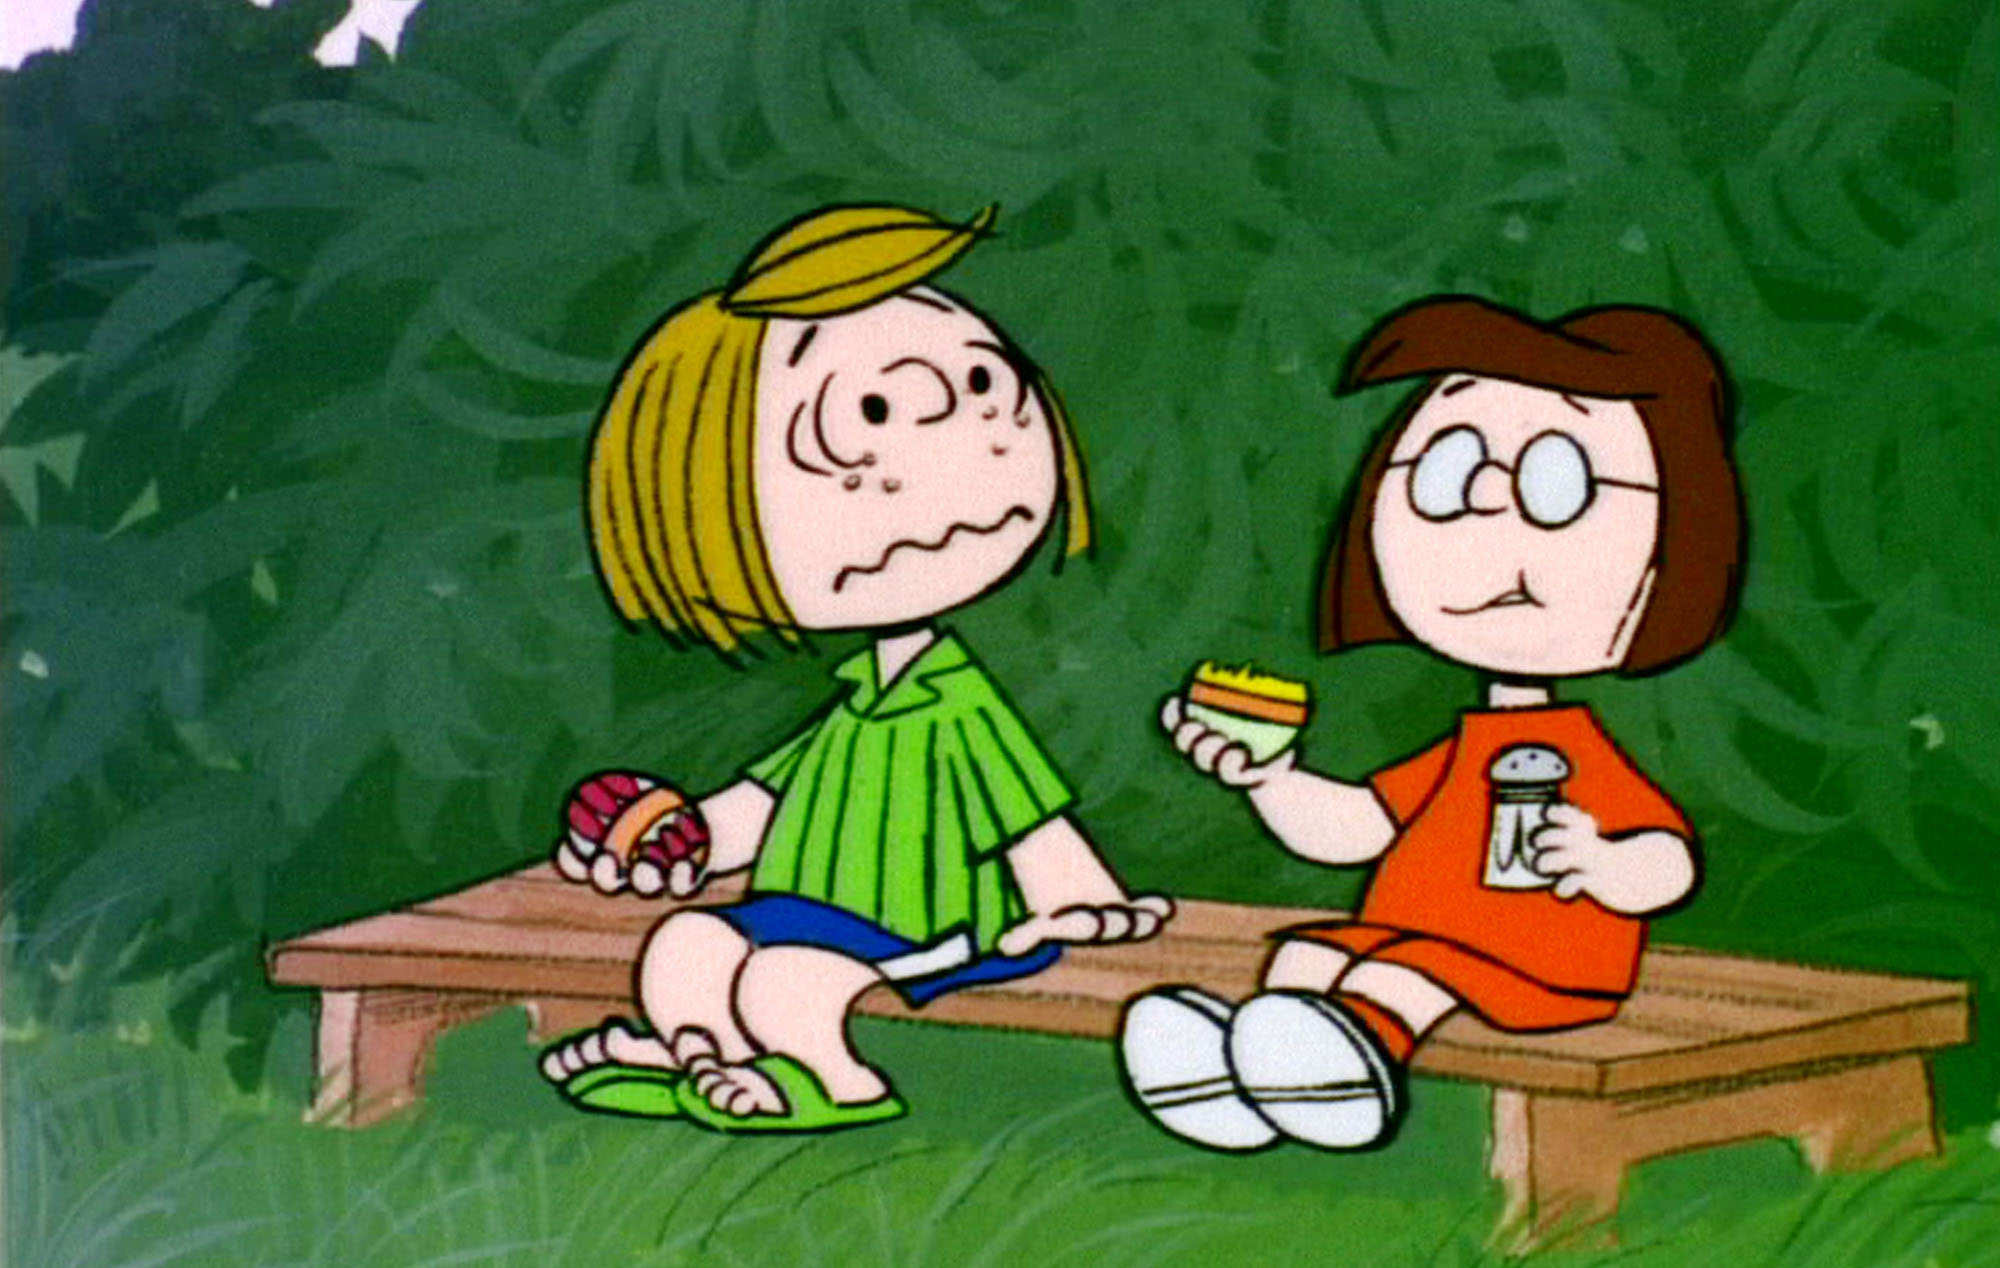 image from the 1974 animated Peanuts special "It's the Easter Beagle, Charlie Brown." It shows Peppermint Patty, on the left, and Marcie sitting on a bench. Each is holding a colored Easter egg, but Patty is looking in astonishment at Marcie, who has just taken a bite out of her egg after sprinkling salt on it (Marcie has the egg in her right hand and the salt shaker in her left, and her facial expression shows she is chewing the hard shell of the egg).